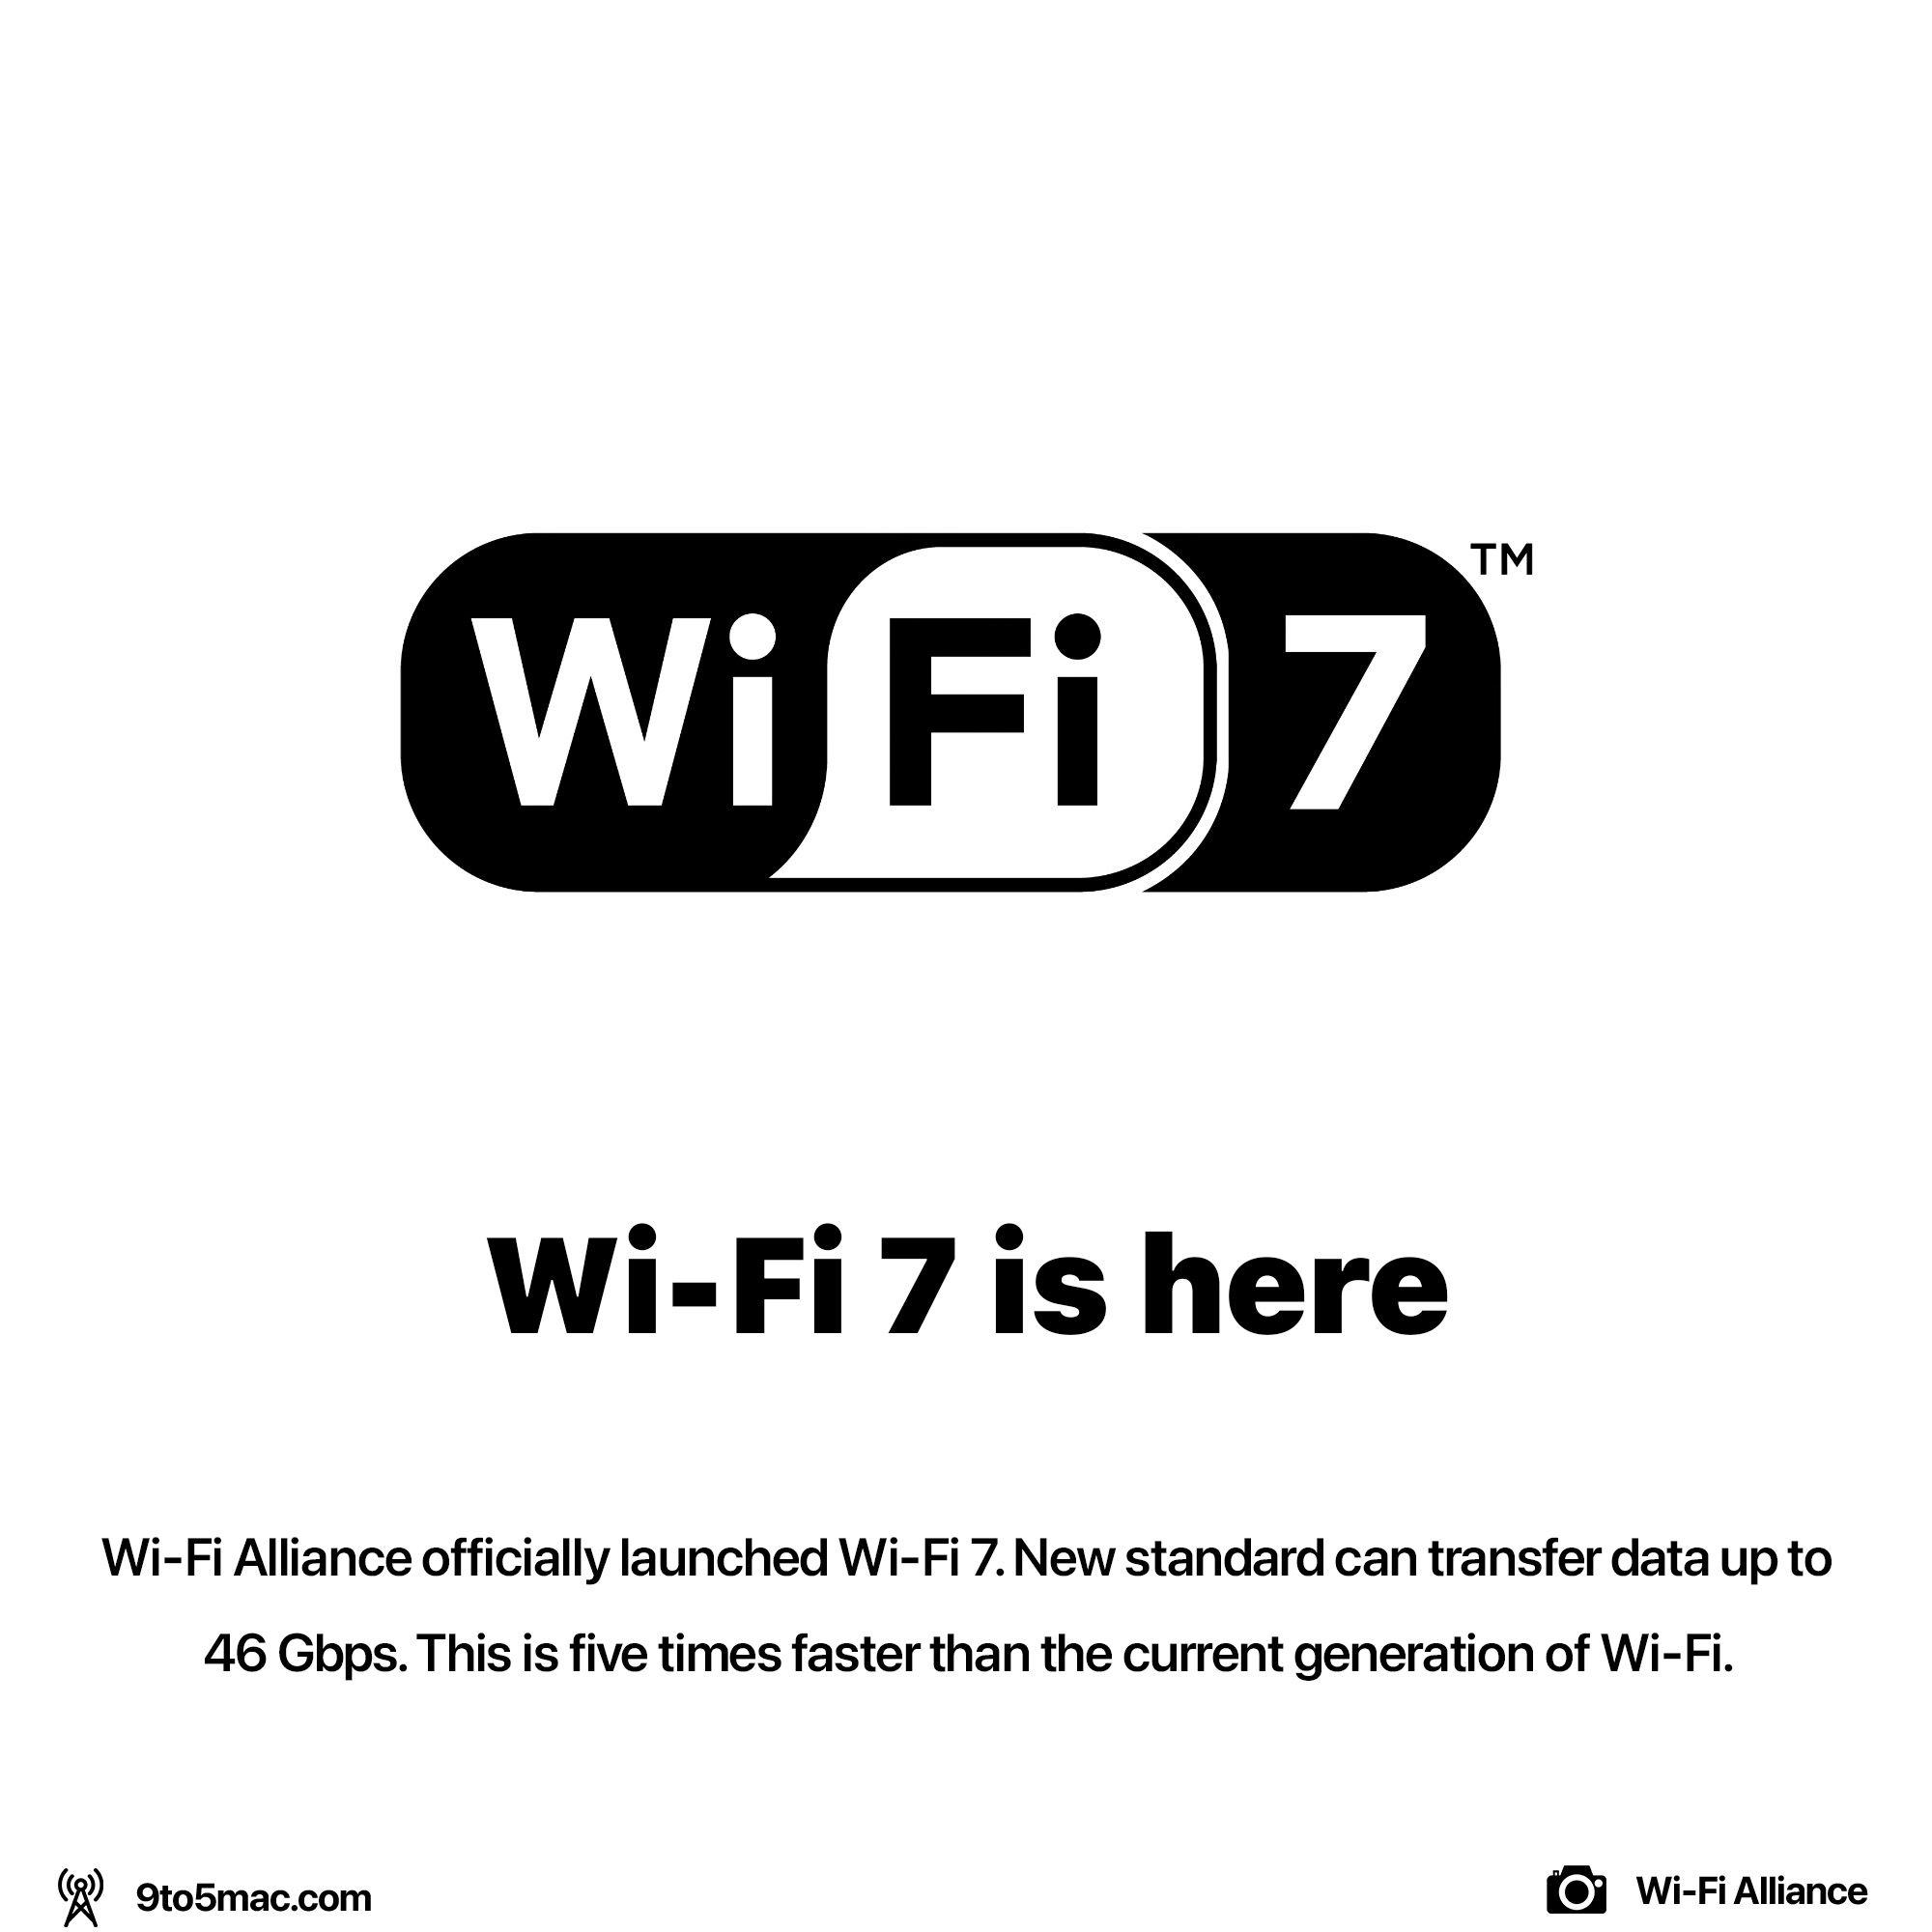 Wi-Fi 7 is here